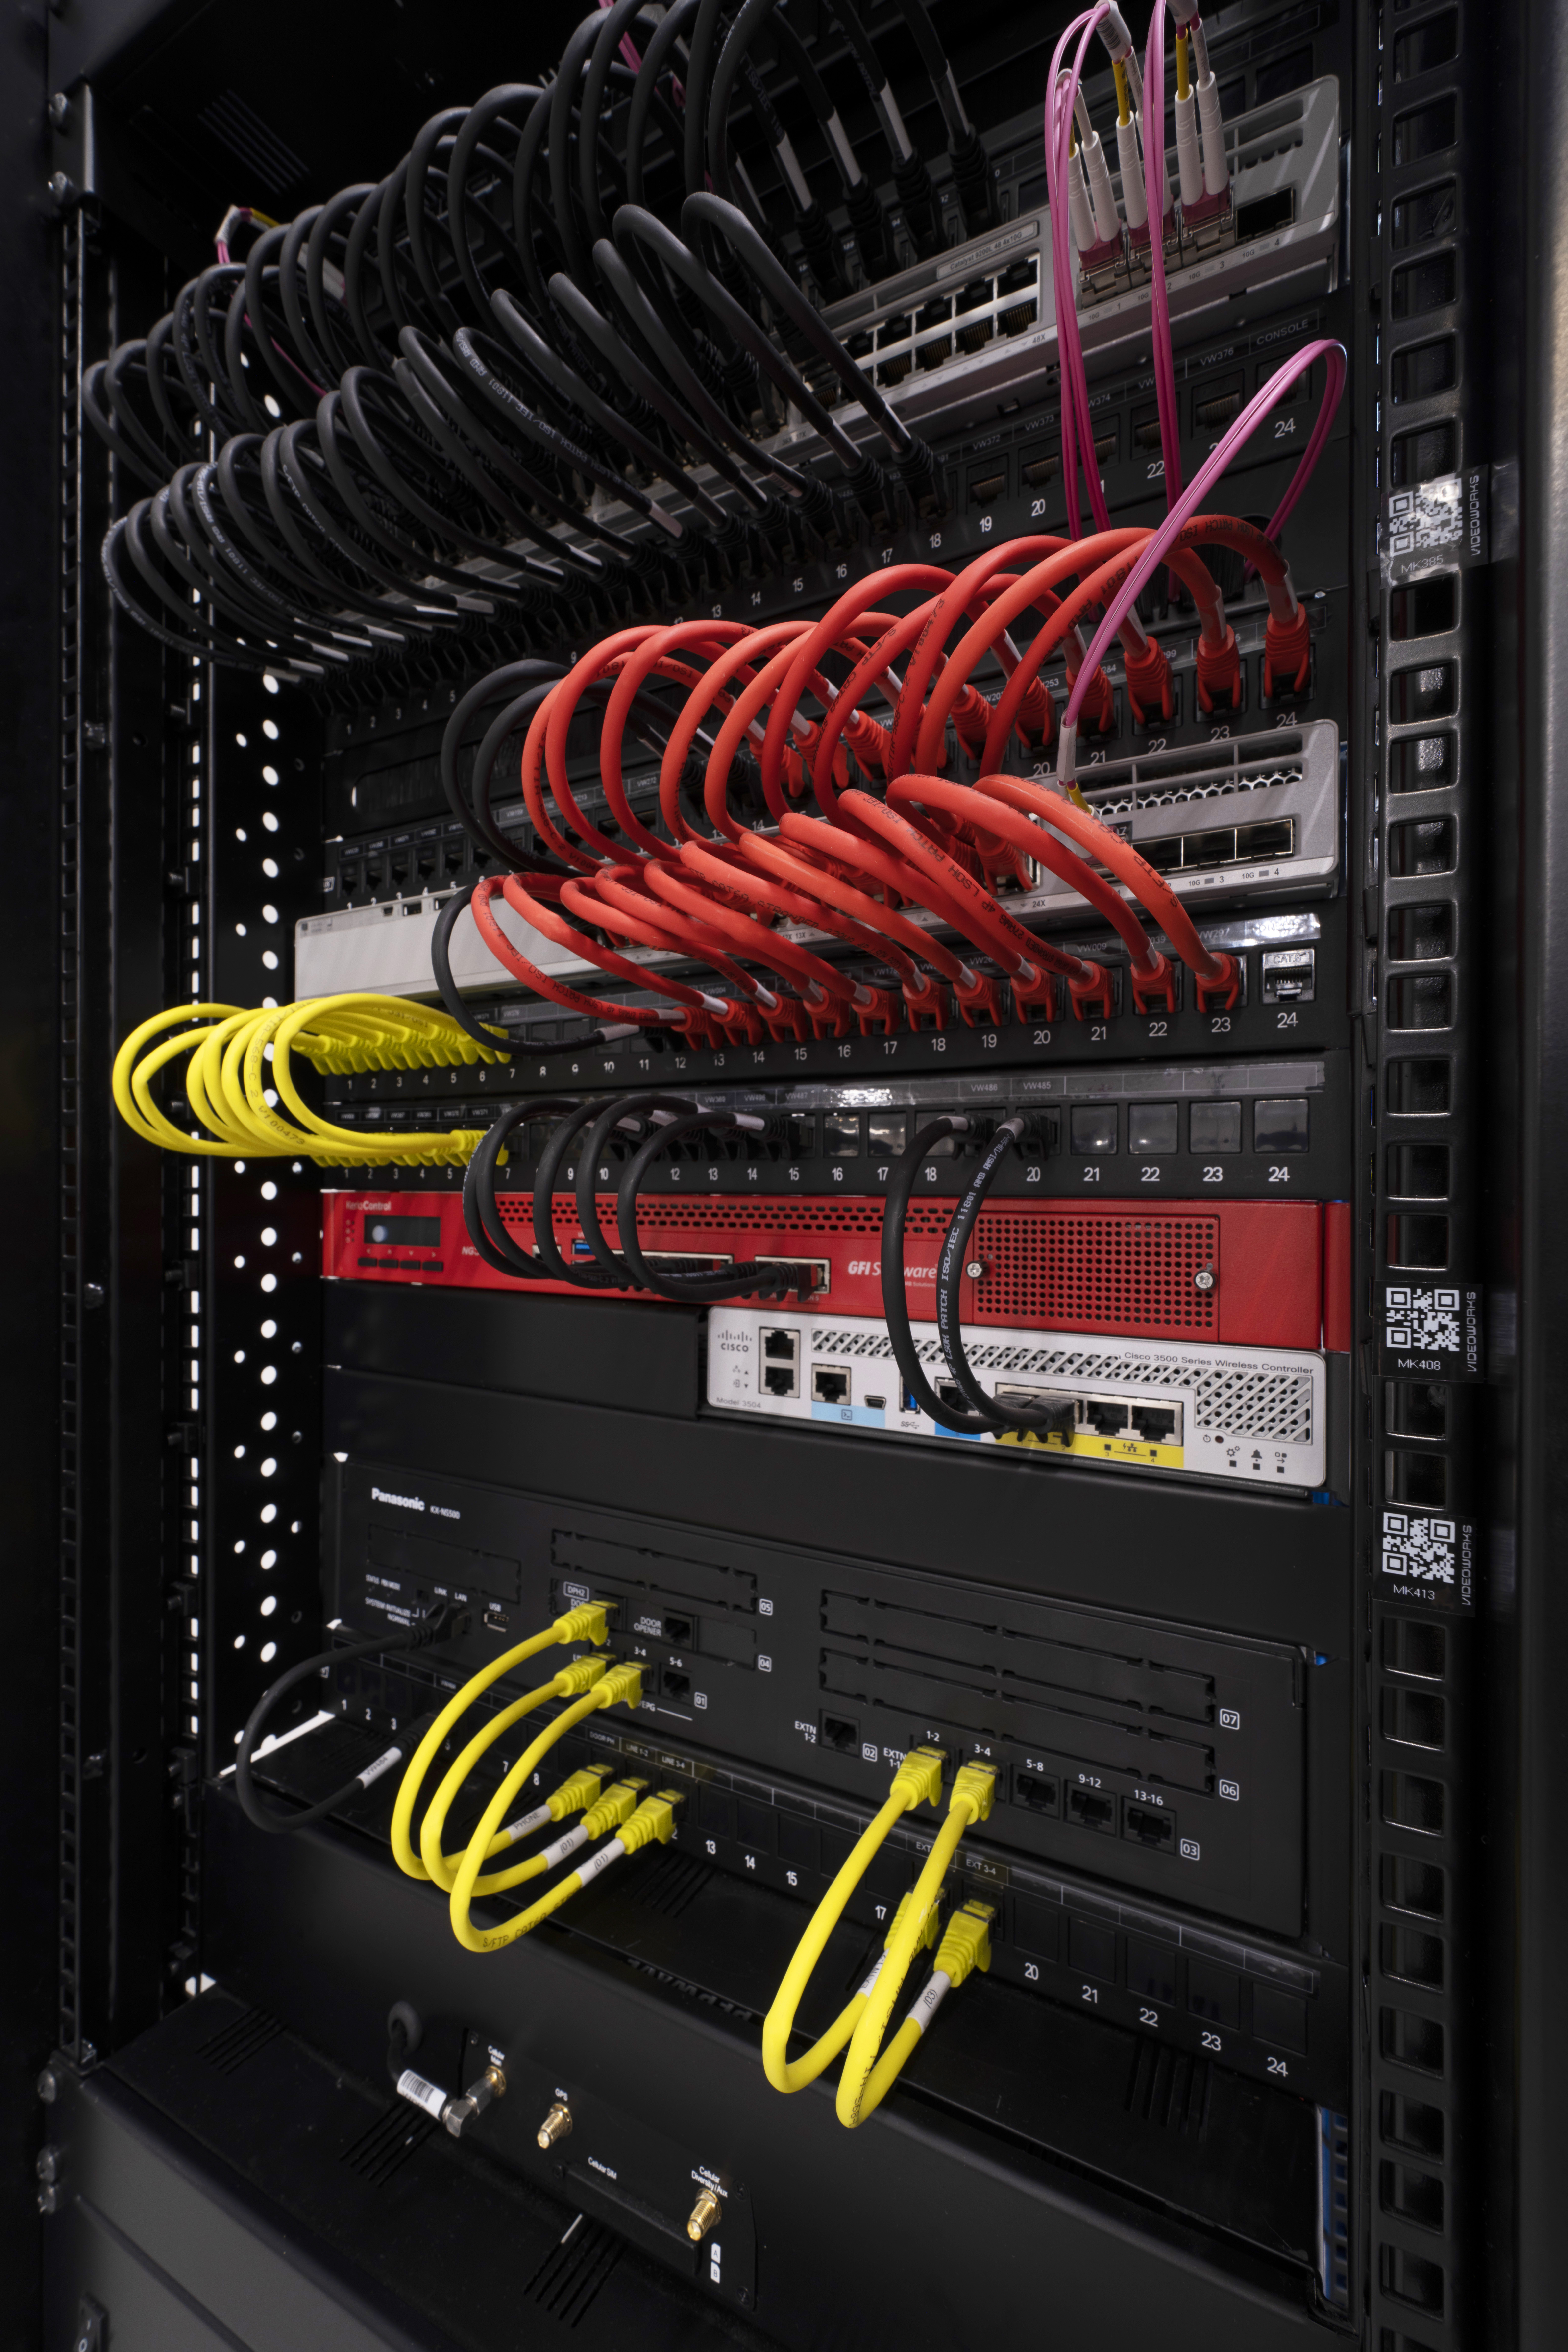 Photo of server rack controlling onboard systems